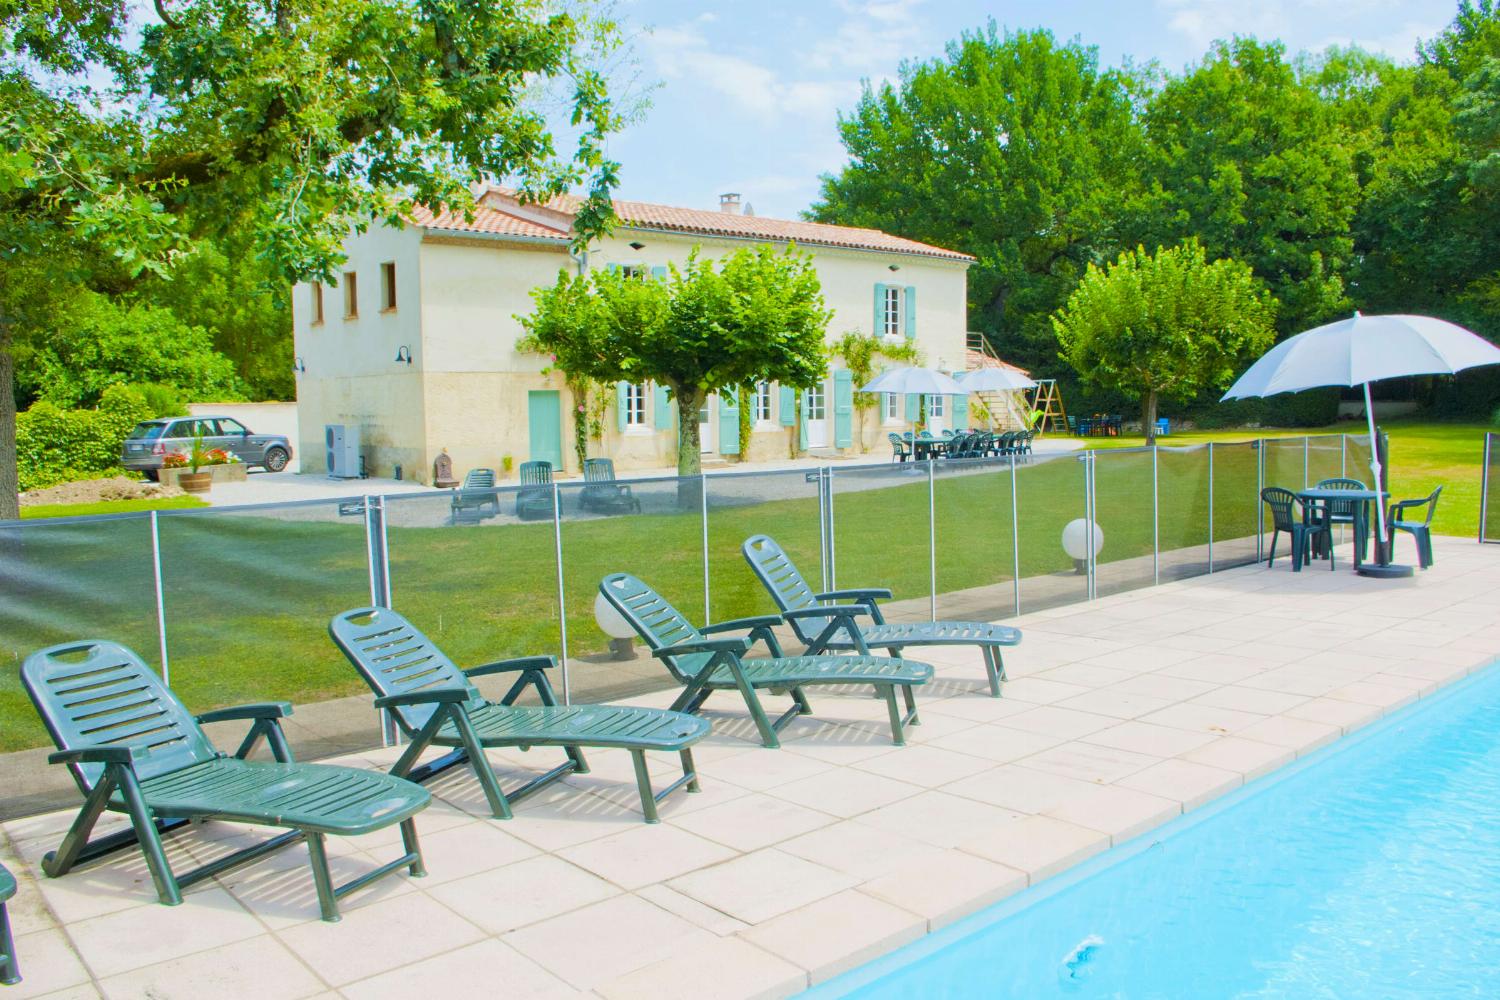 Holiday accommodation in South West France with private heated pool